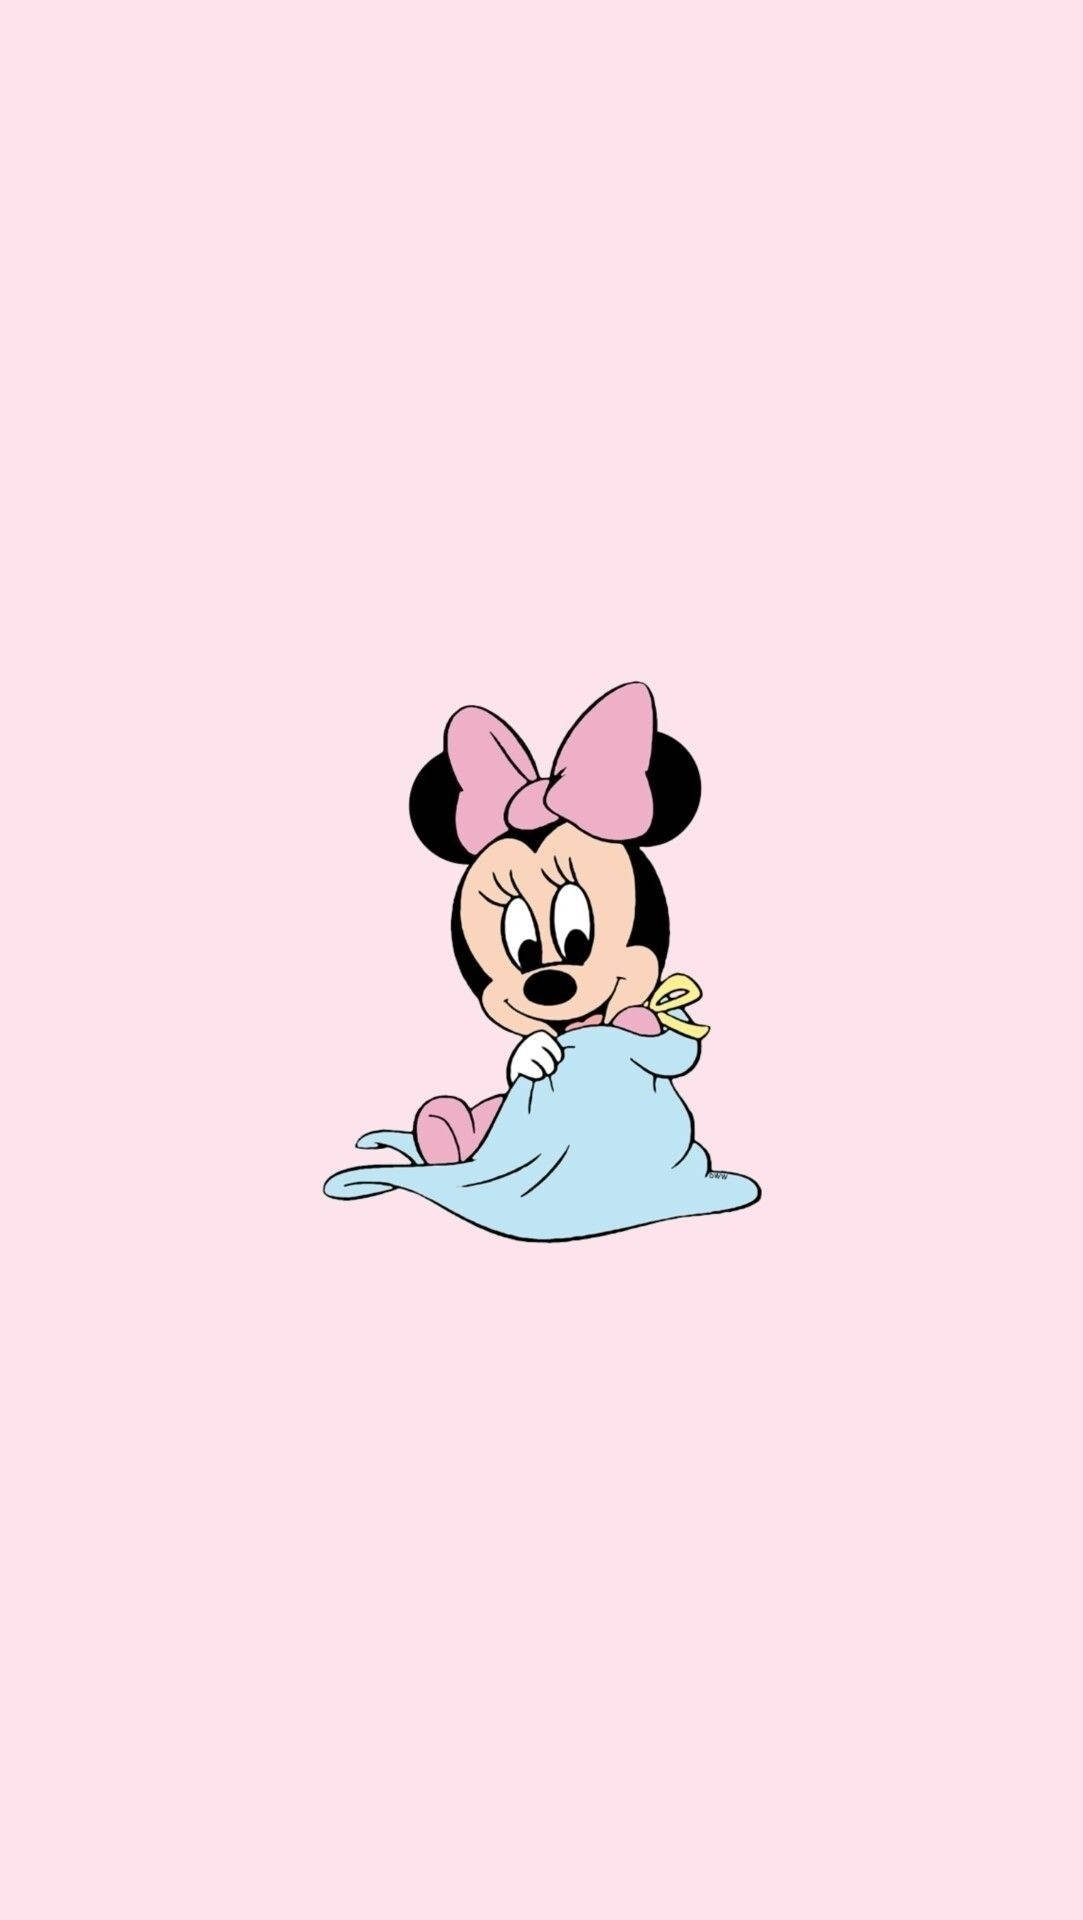 Cute Disney Aesthetic Minnie Mouse Wallpaper